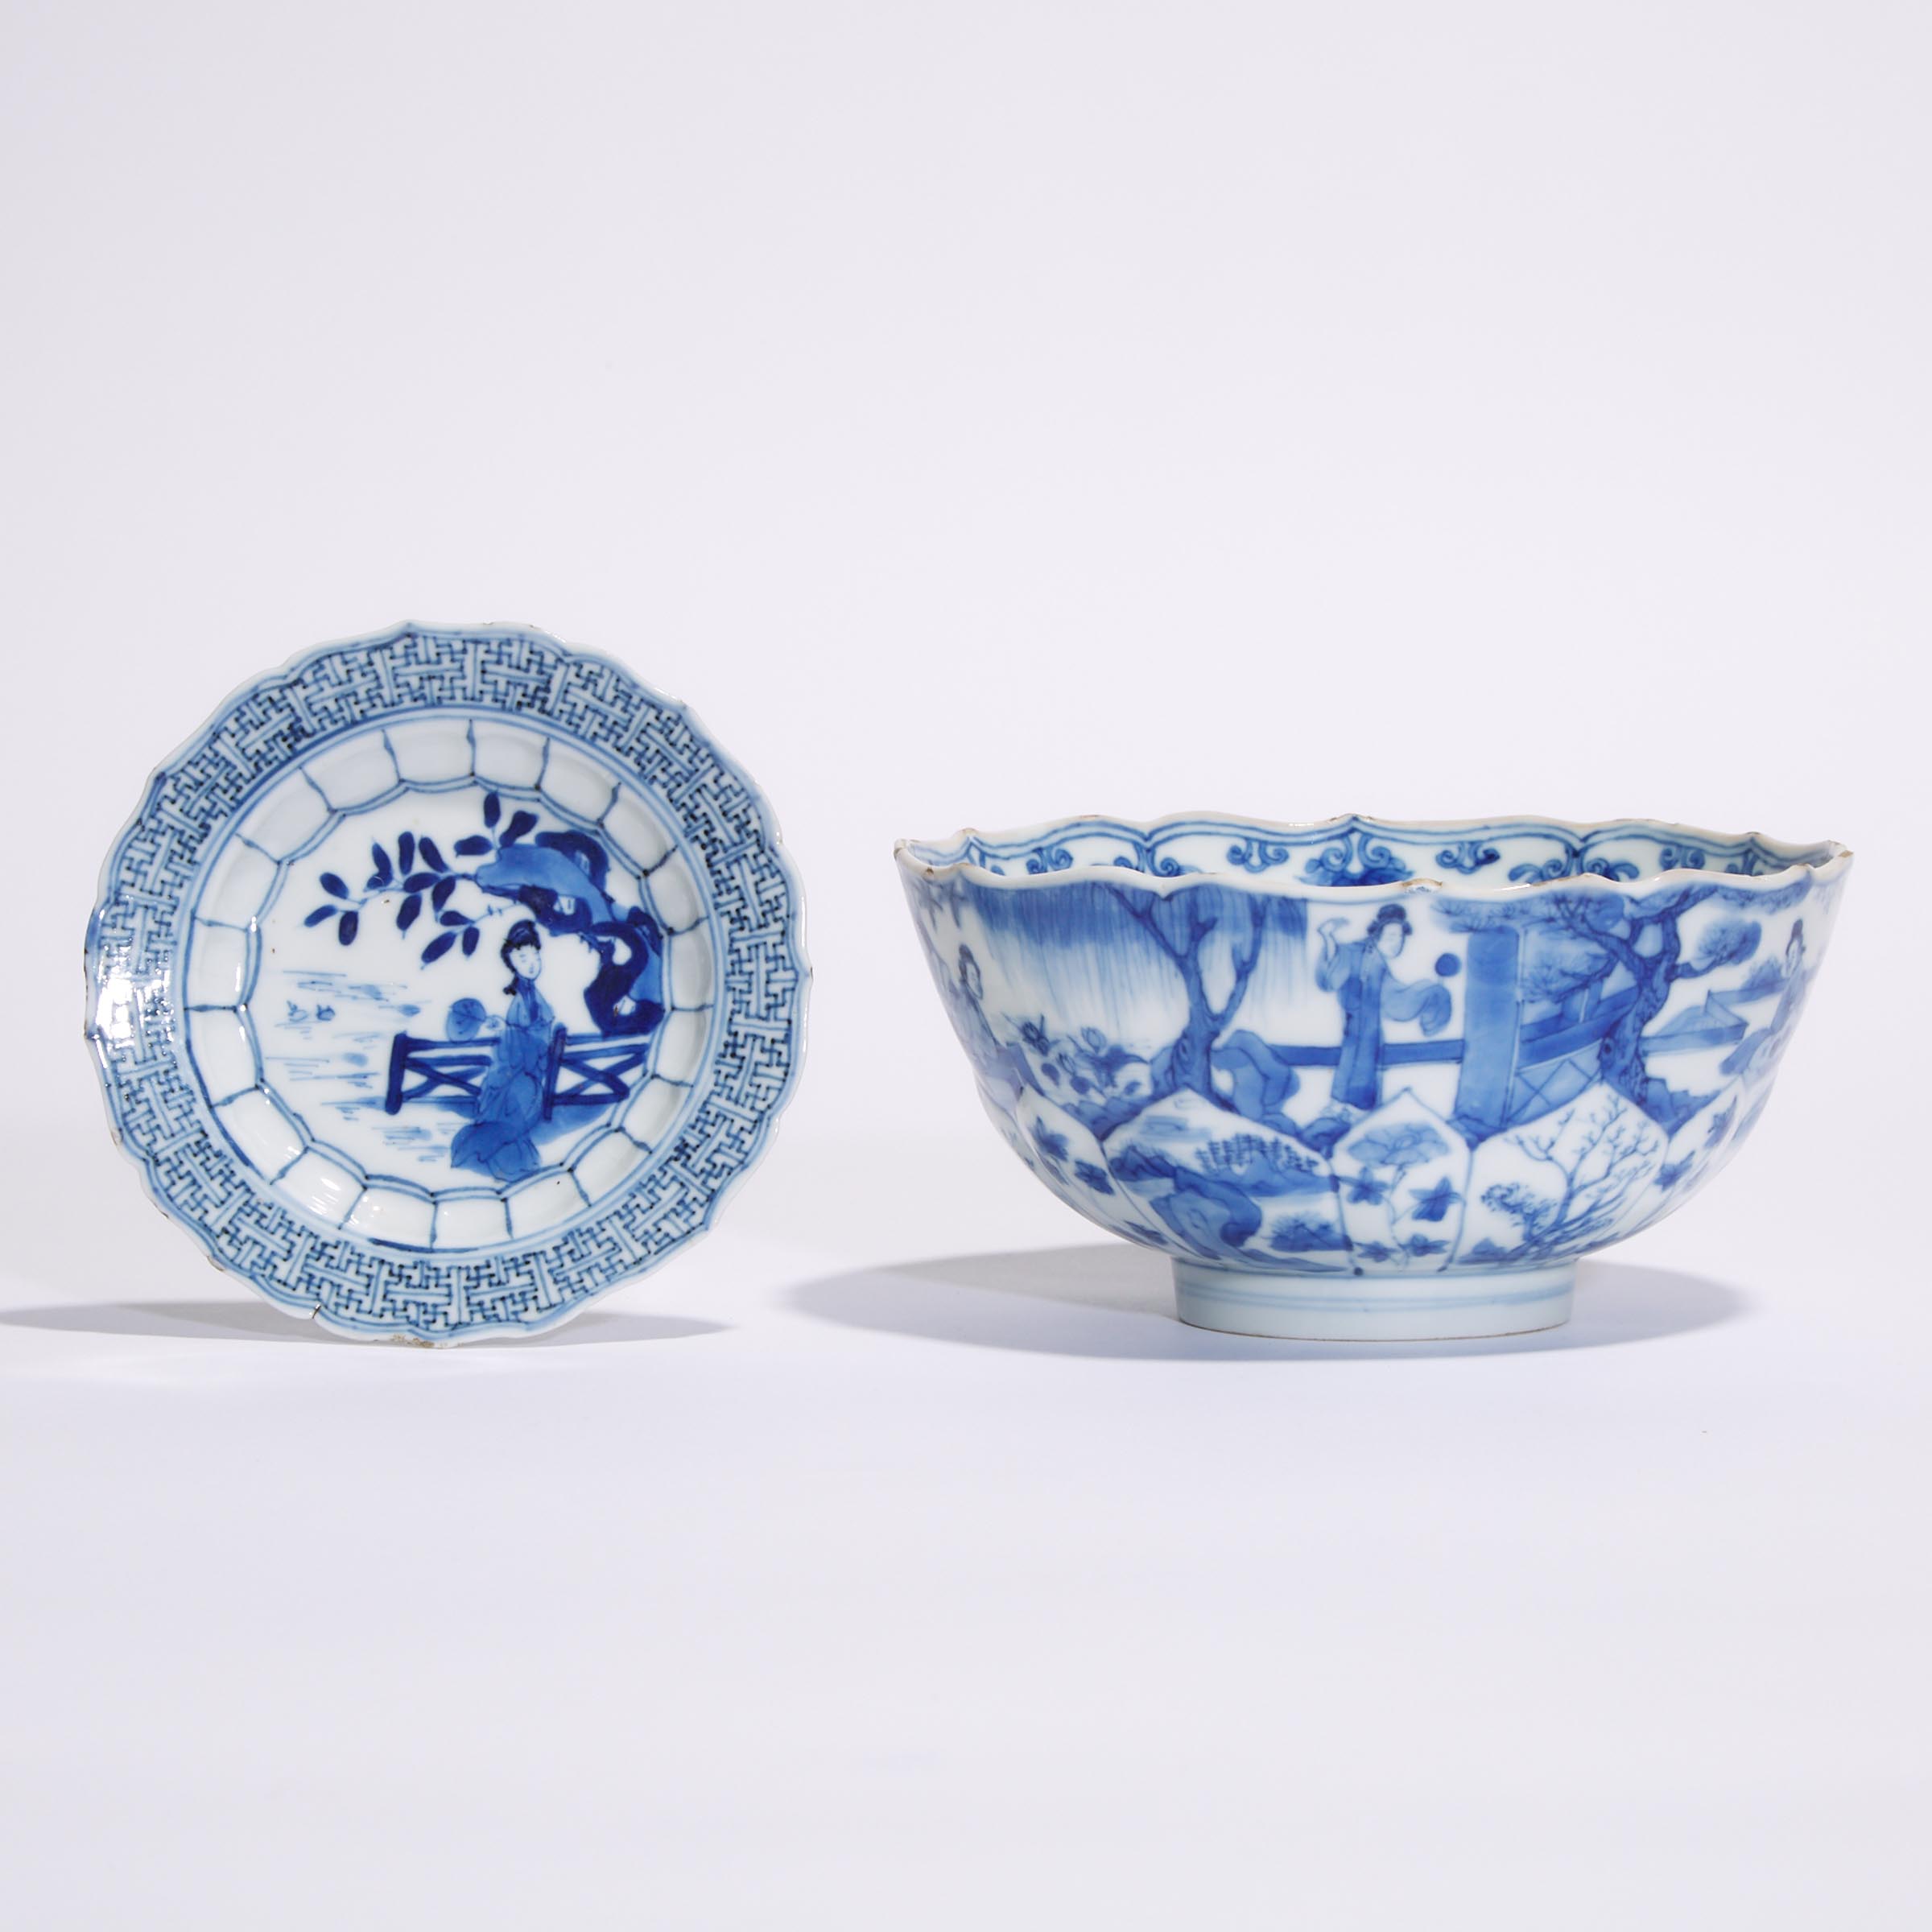 A Blue and White Barbed-Rim 'Lotus' Bowl, Kangxi Mark and Period (1662-1722), Together With a Saucer